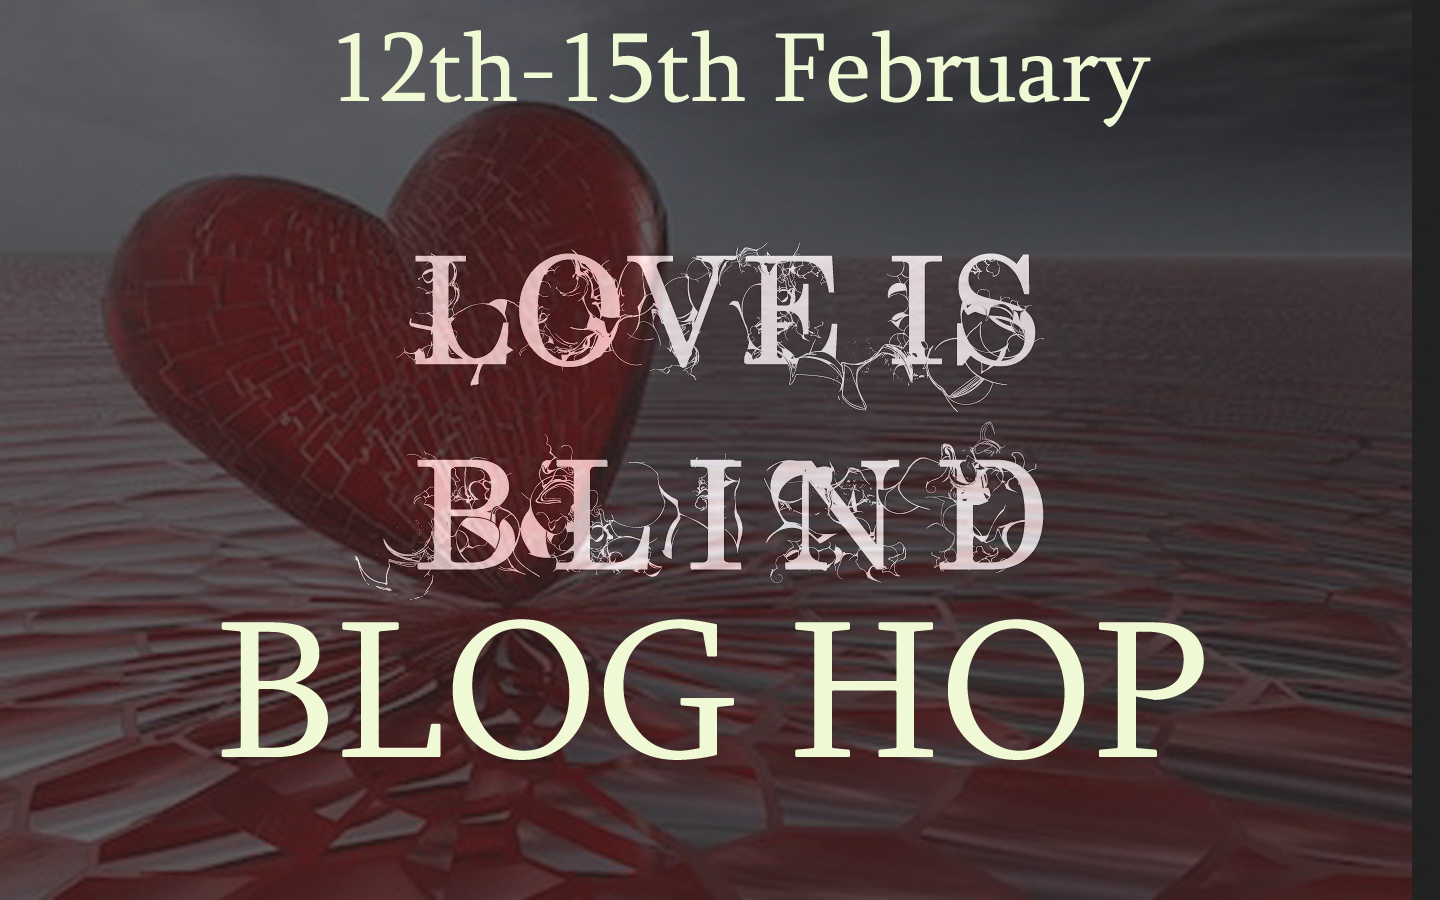 February 15-th. Love is Blind.